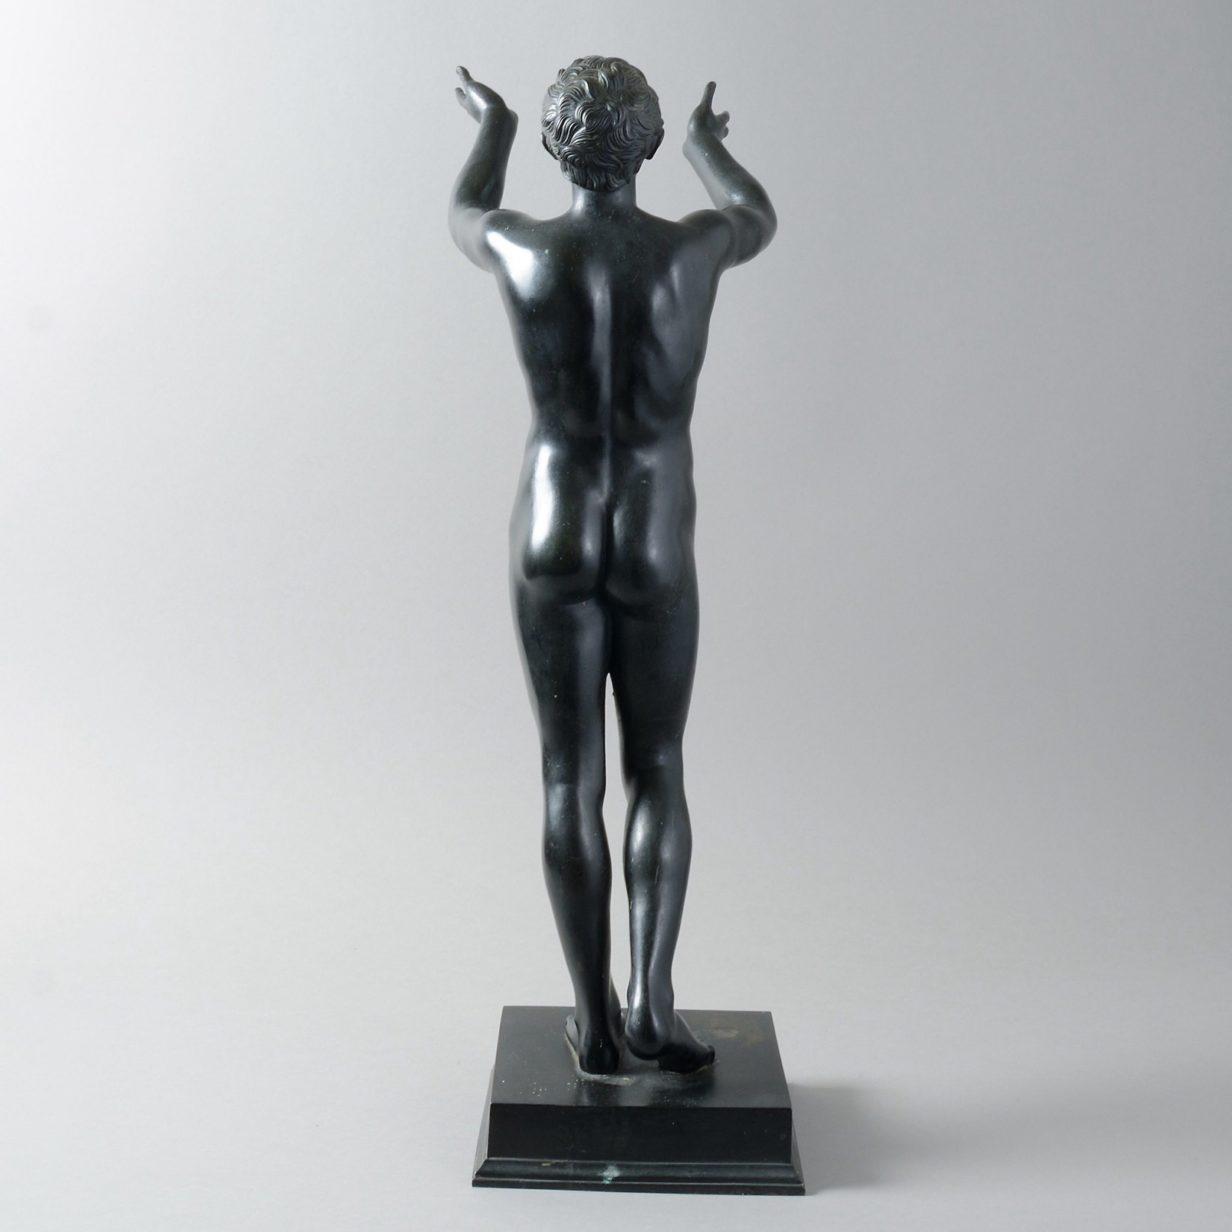 An early 19th century bronze reduction of the orans